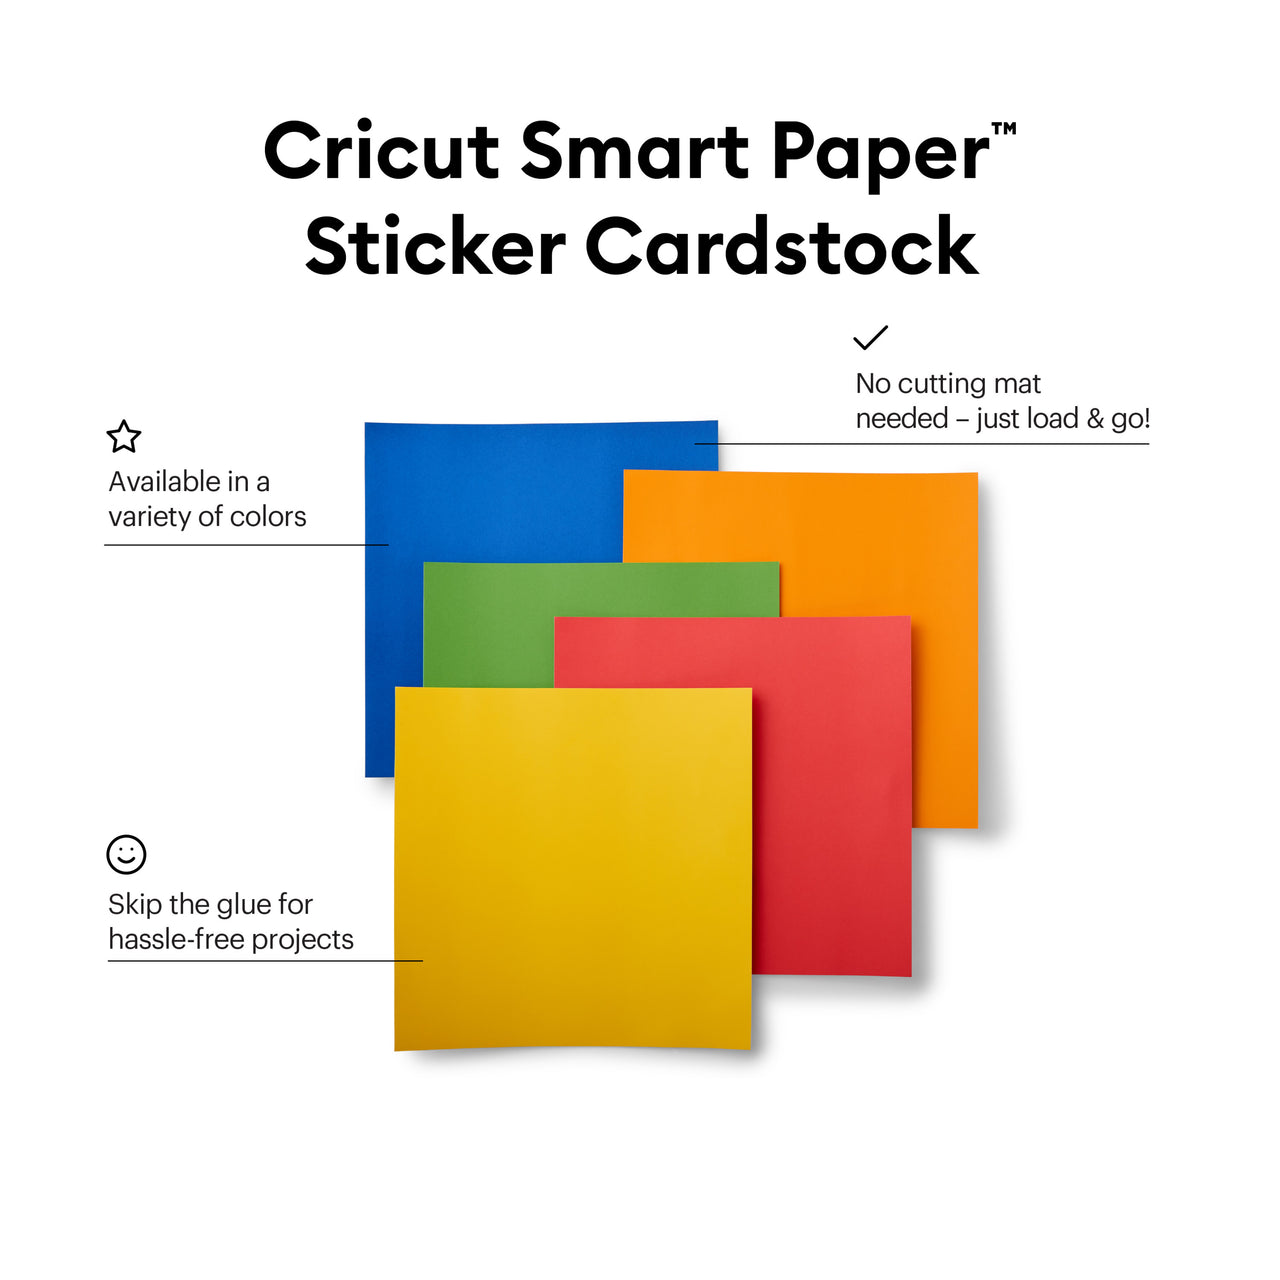 Cricut Smart Paper Sticker Cardstock Bright Bow and Pastels Bundles 10 Sheets - 13in x 13in - Adhesive Paper for Stickers